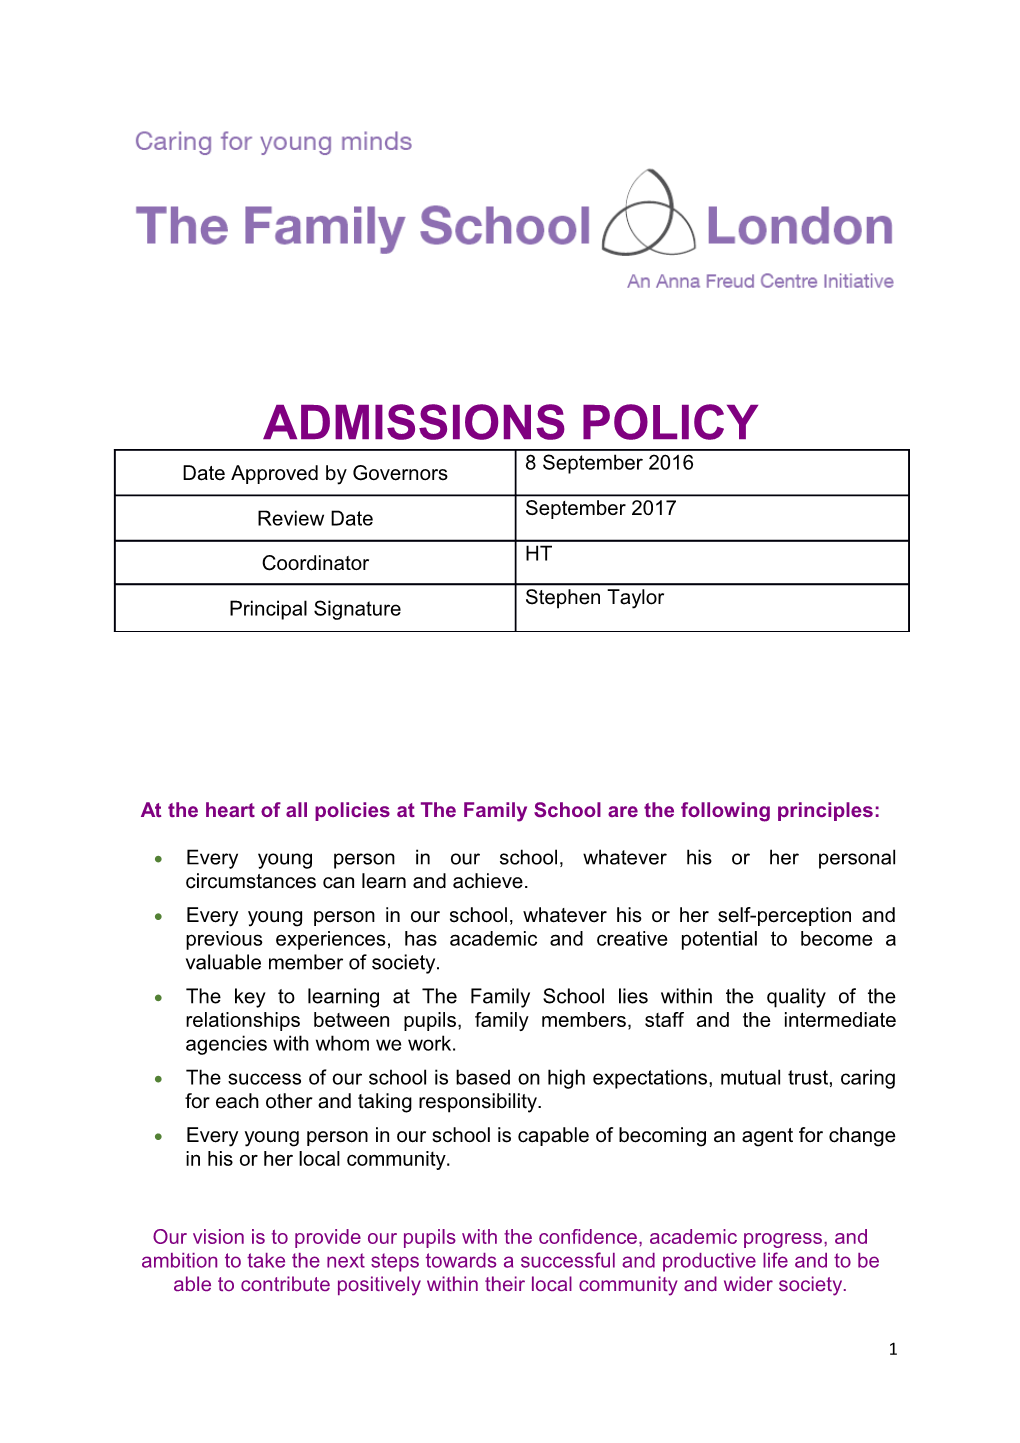 At the Heart of All Policies at the Family School Are the Following Principles